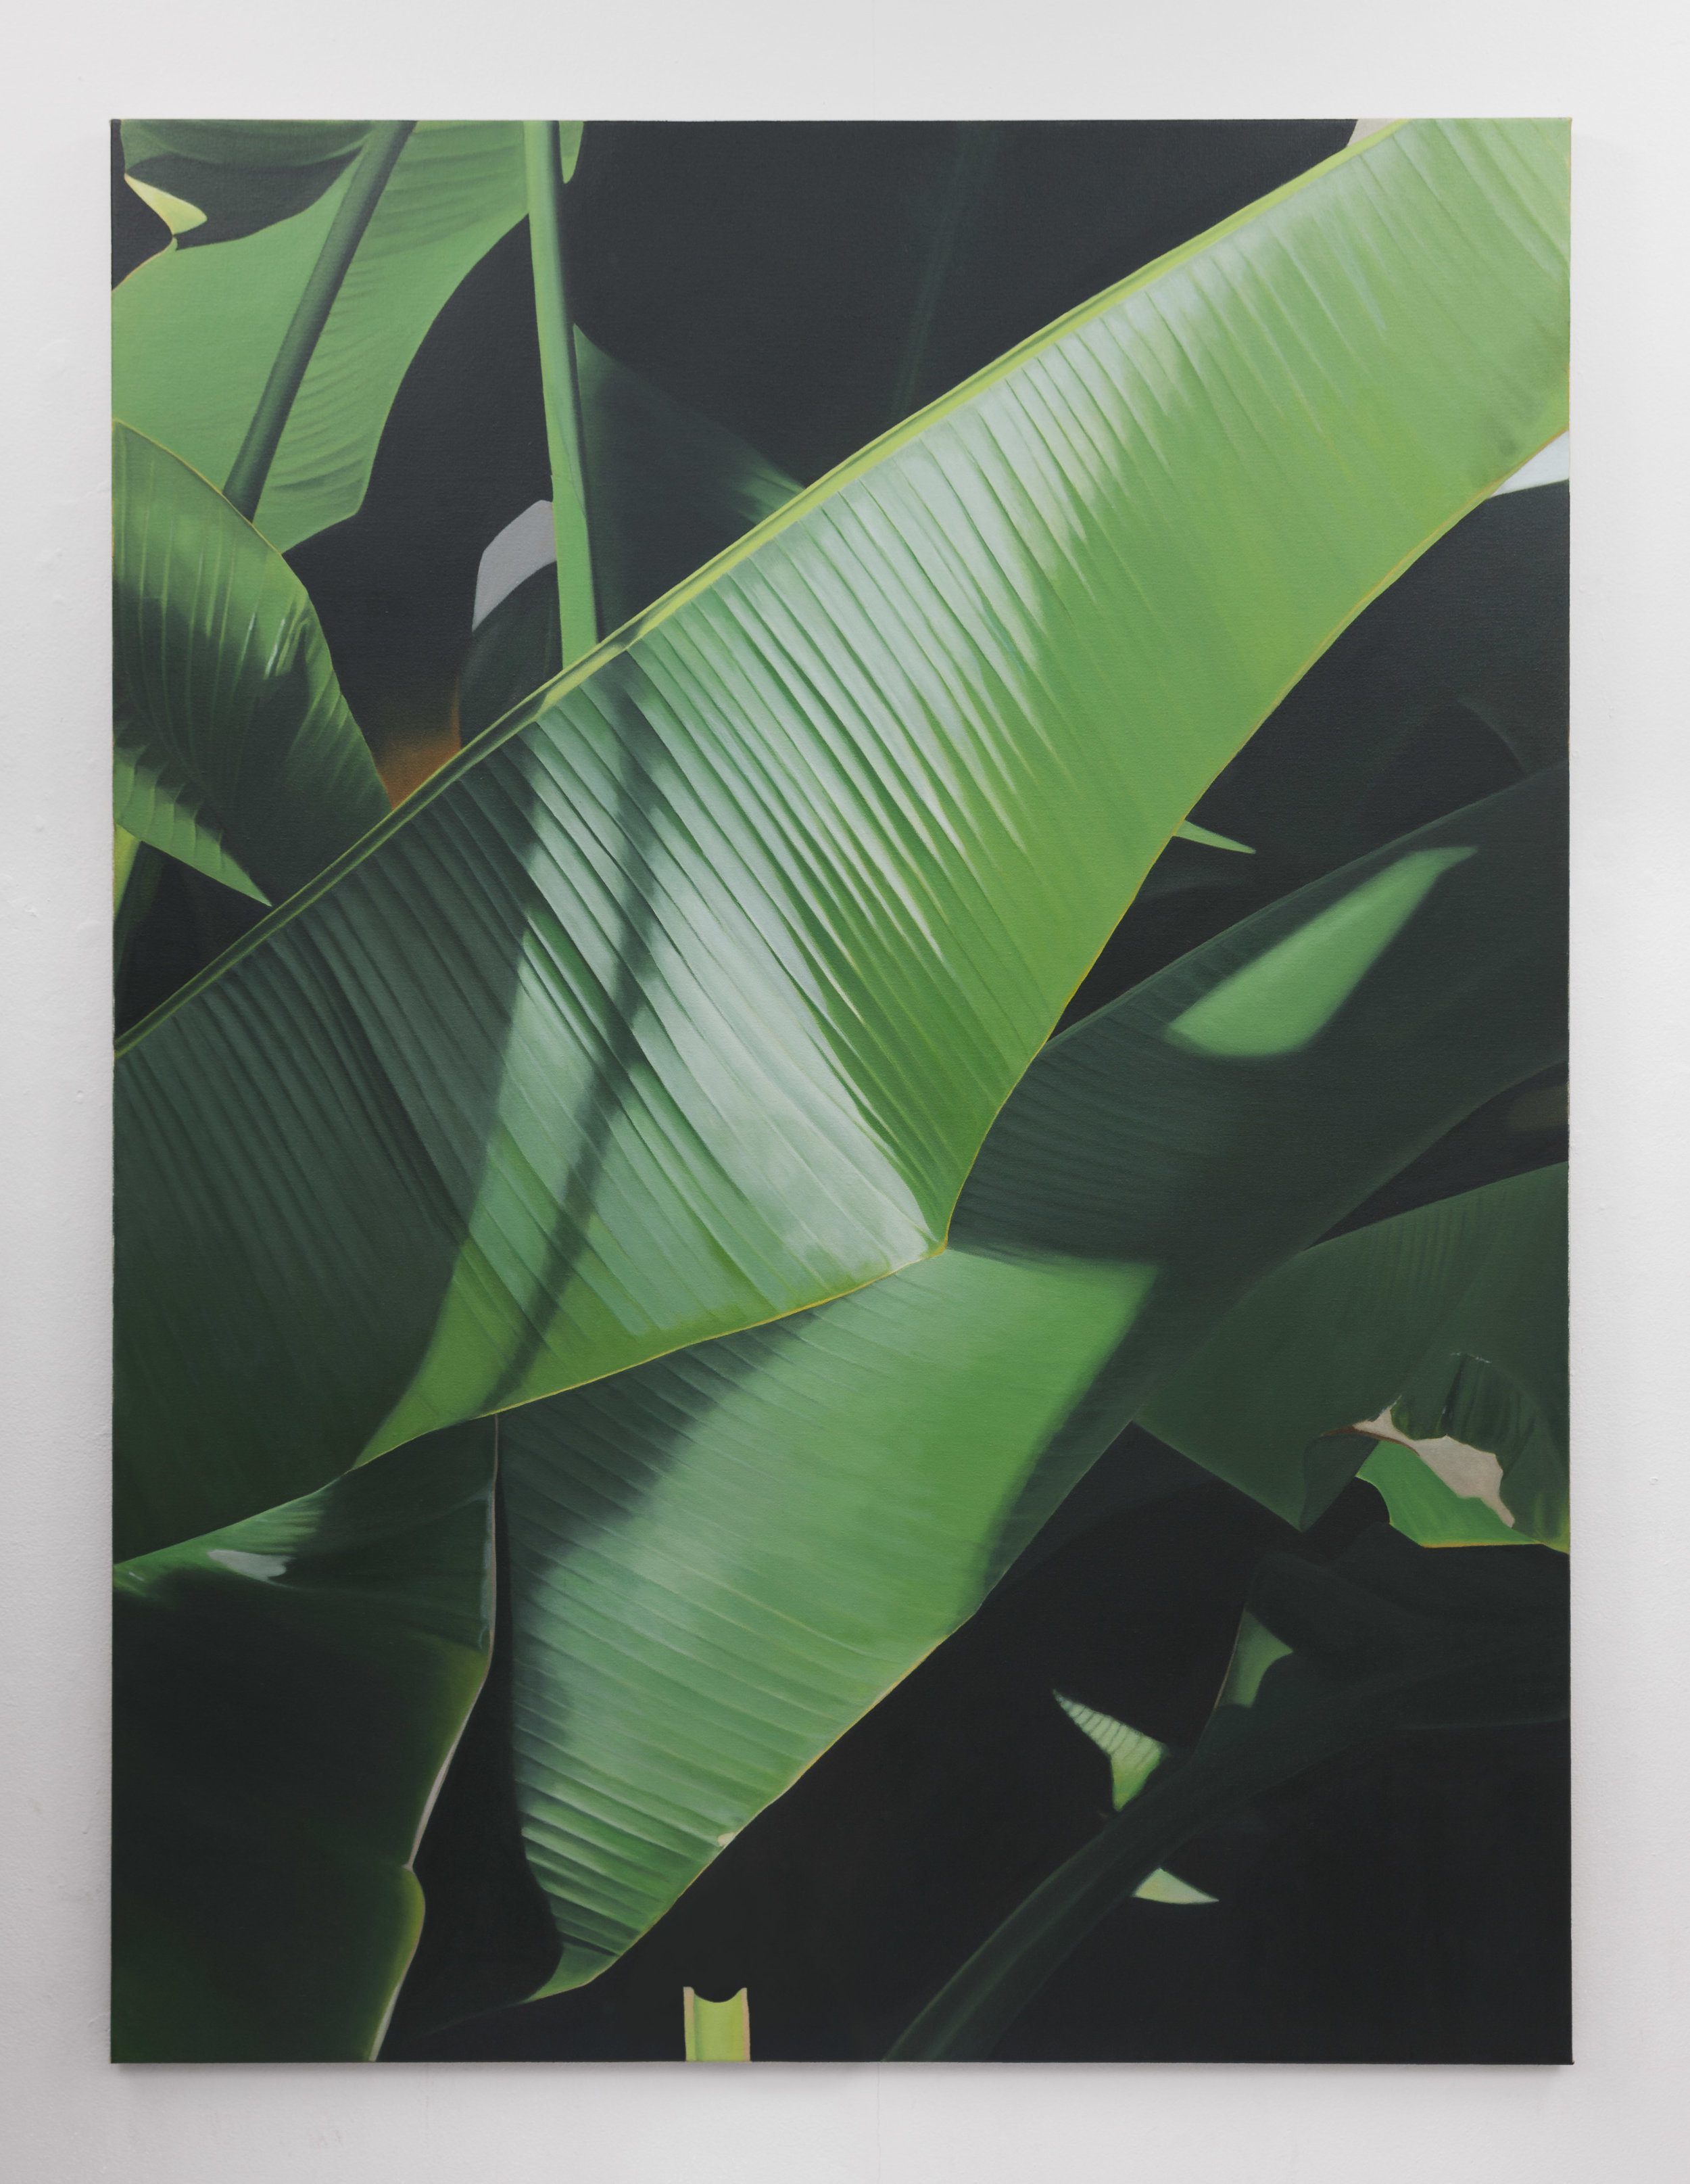  Banana I | 2019 | Oil on linen | 160 x 120 cm | Photo by Lee Welch | Shortlisted The RHA Hennessy Craig Award 